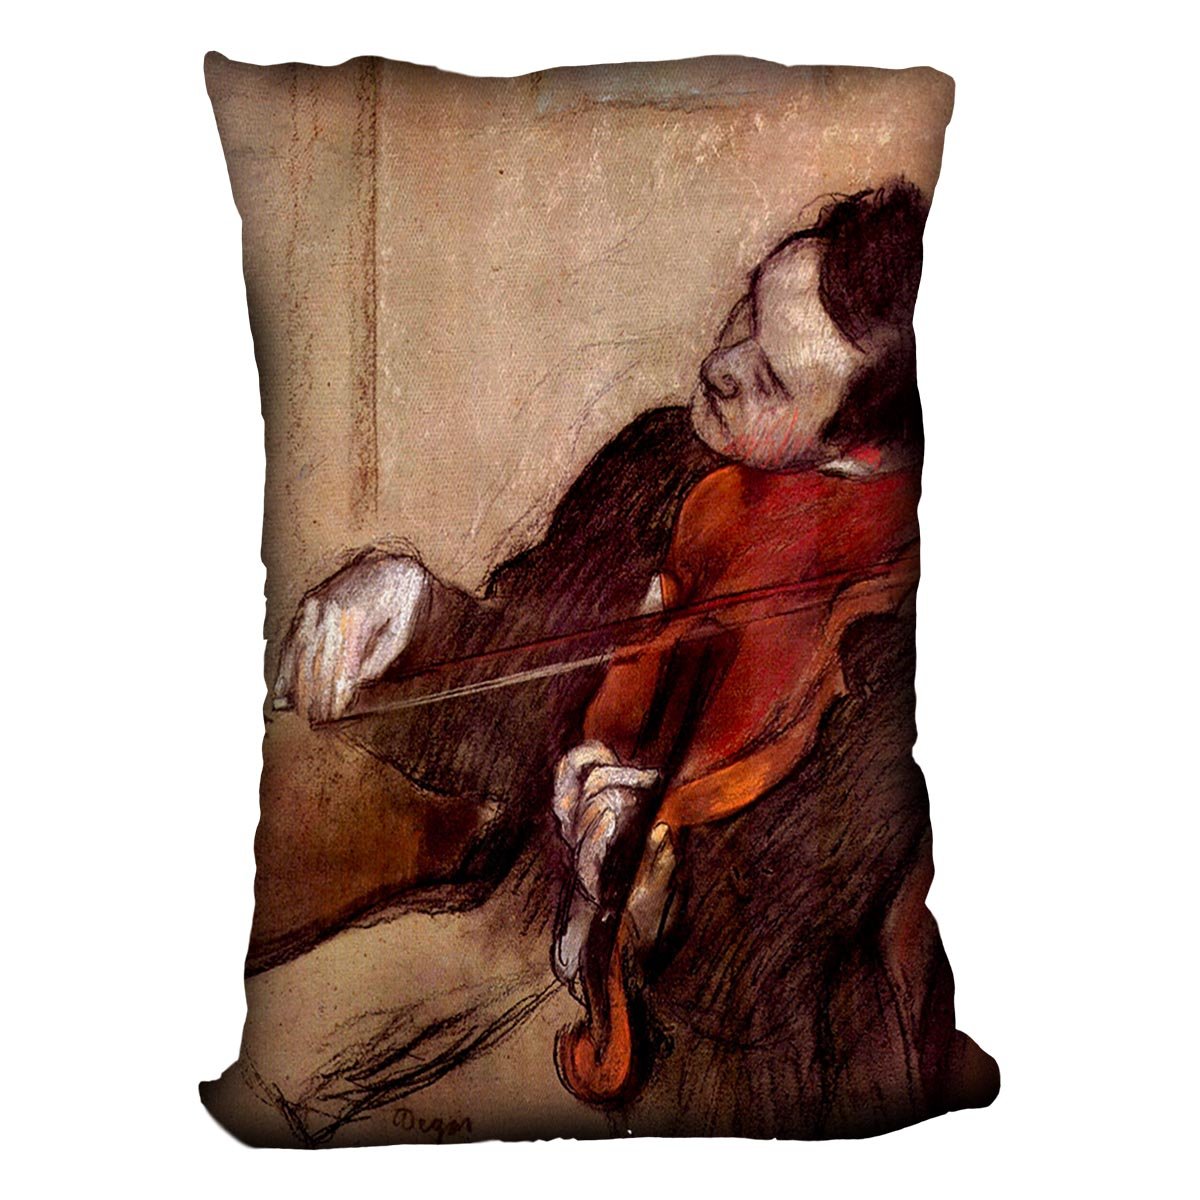 The violinist 1 by Degas Cushion